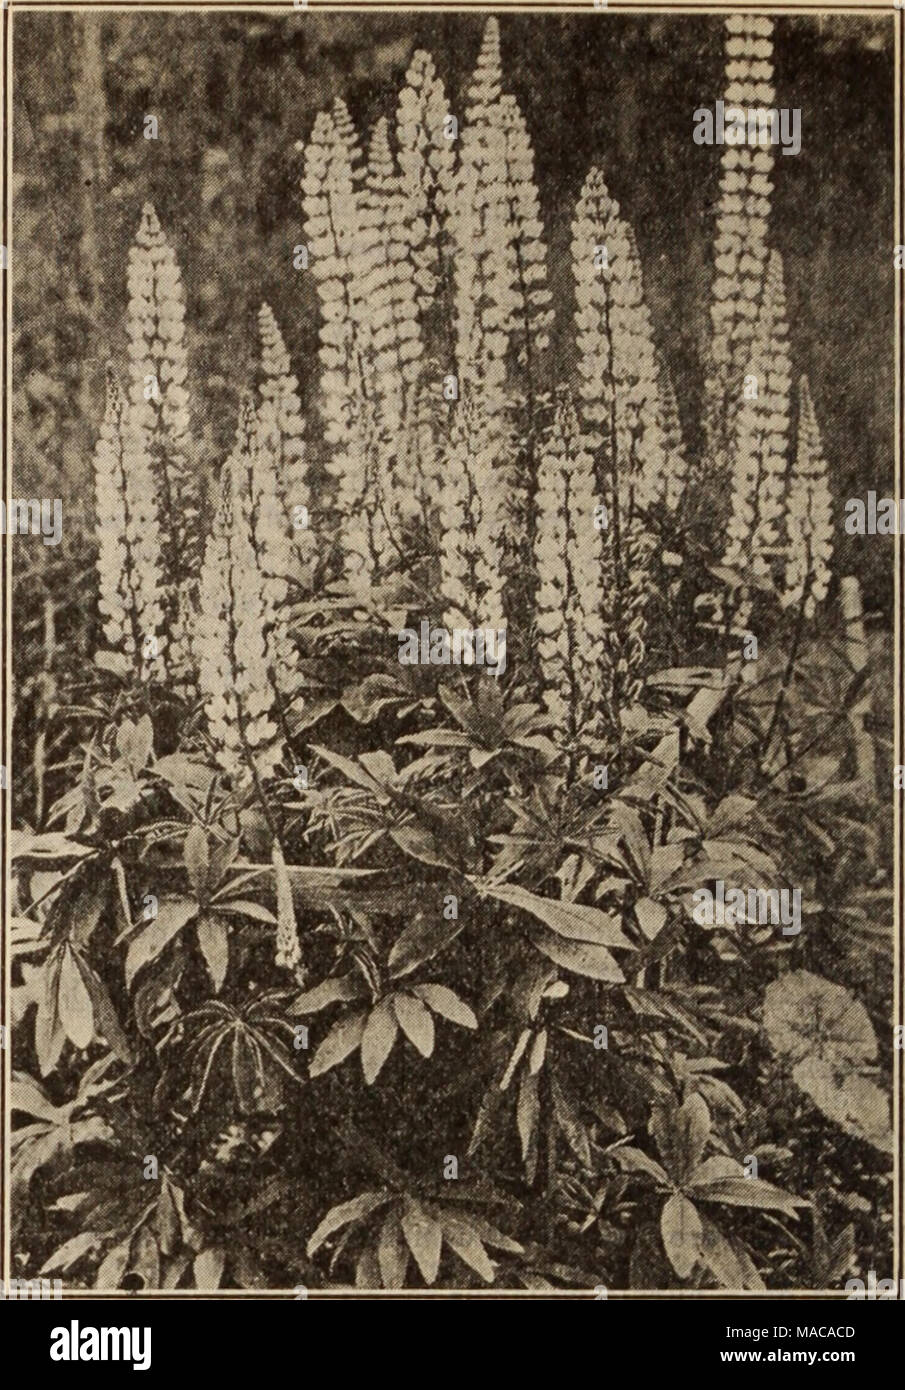 . Dreer's wholesale price list / Henry A. Dreer. . LUPINUS POLYPHYLLUS Lysimachia (Loose-strife). Perdoz. Per 100 Ciliata. 4-inch pots $0 85 $6 00 Clethroides. 4-inch pots 85 6 00 Fortunei 85 6 00 Nummularla. 3-inch pots 75 5 00 Punctata. 4-inch pots 85 6 00 Lythrum (Rose Loose-strife). Roseum Superbum. Strong 85 6 00 Virgatum 1 50 10 00 Perry's Variety (New) 2 50 Mertensia (Blue Bells). Virginica. 3-inch pots 1 25 8 00 Monarda (Horse Mint). Didyma. 4-inch pots 85 6 80 Rosea. 4-inch pots 85 6 00 Splendens. 4-inch pots 85 6 00 Cambridge Scarlet. 4-inch pots .... 85 6 06 Violacea (New). 3-inch p Stock Photo